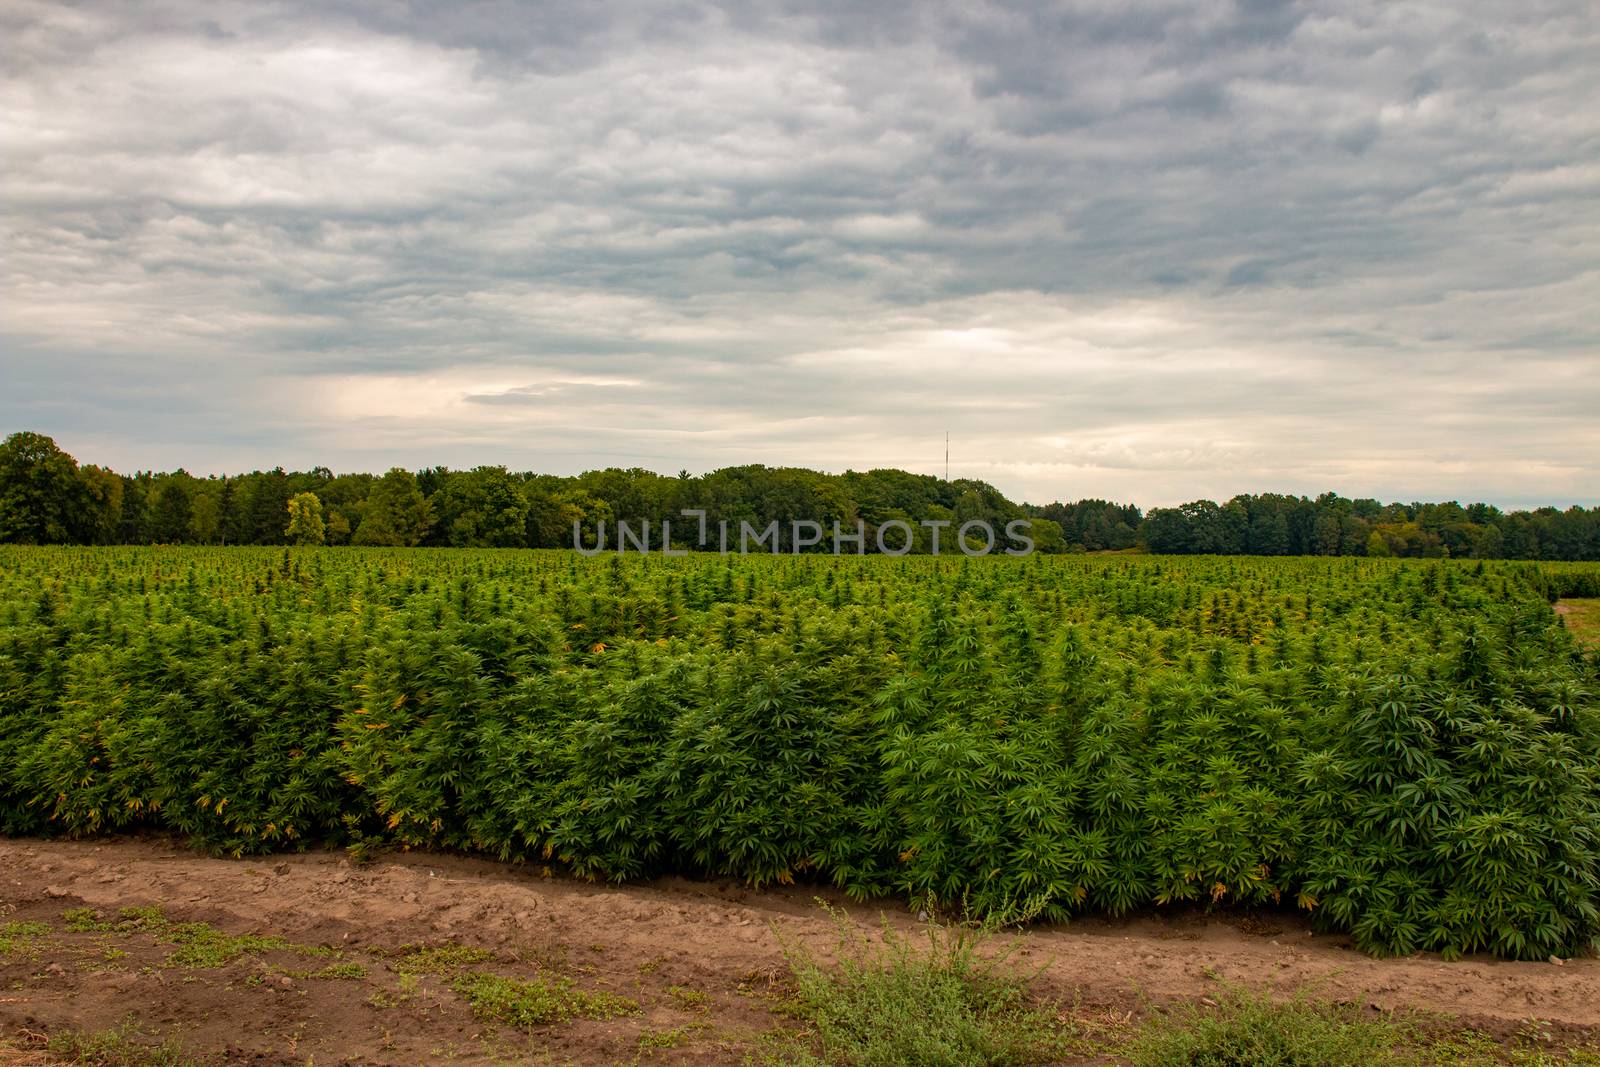 An industrial hemp field in Ontario canada. Hemp is a large agricultural industry with many uses. by mynewturtle1